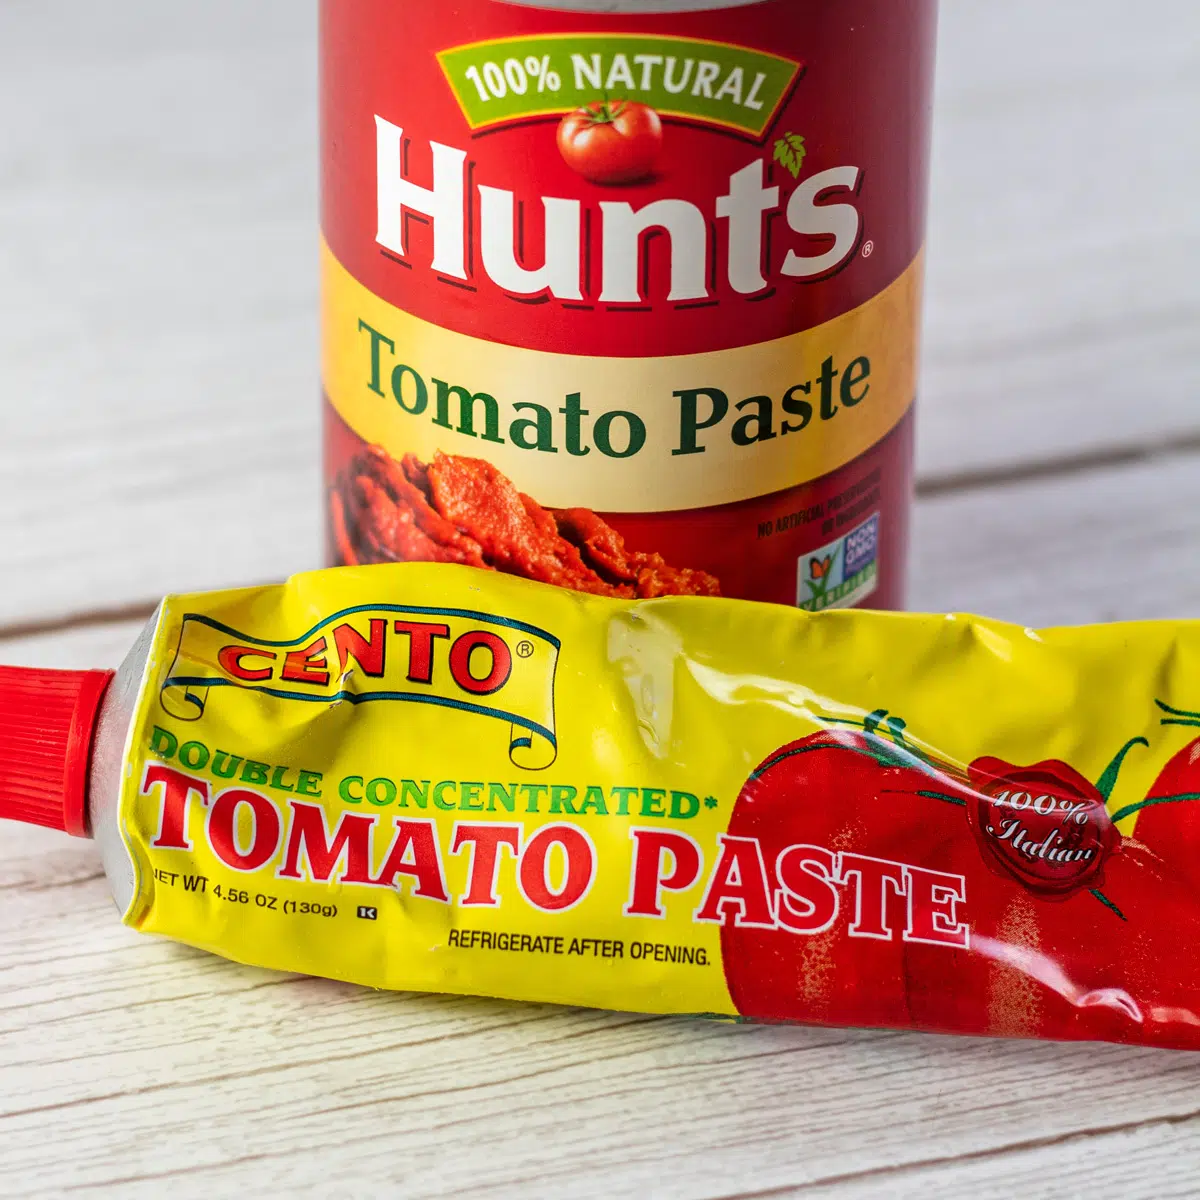 Best tomato paste substitute image showing tomato paste products.